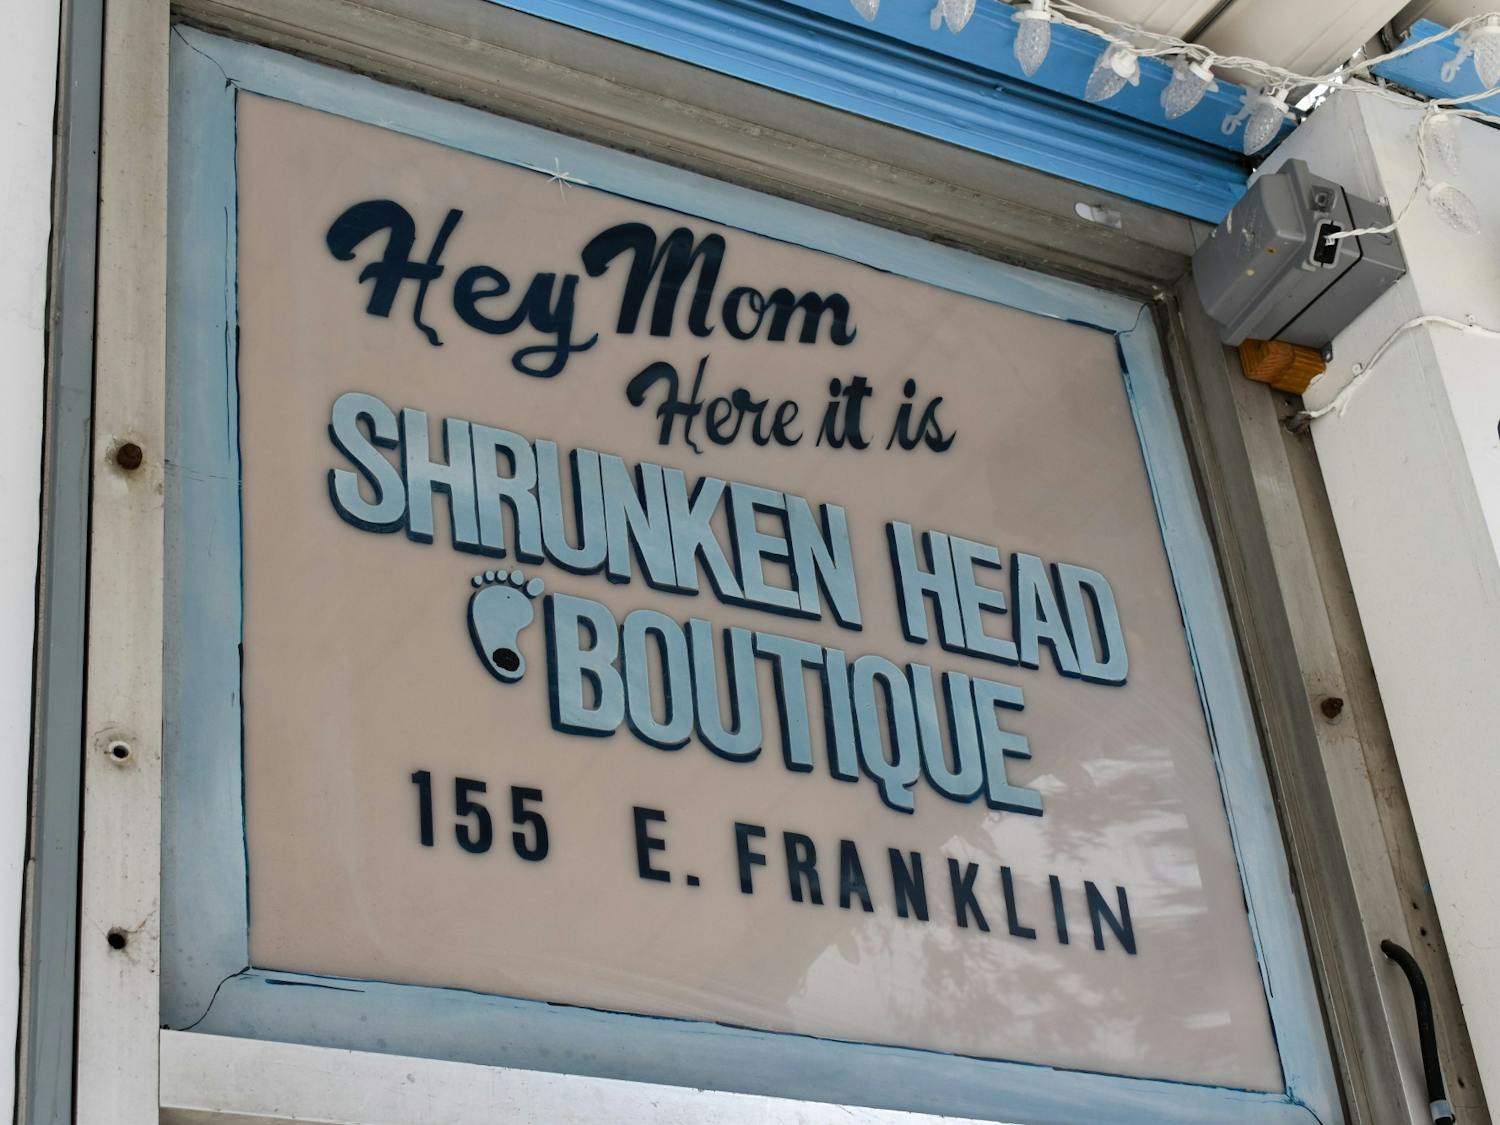 The sign over Chapel Hill's Shrunken Head Boutique's front-door is pictured on March 3, 2022.